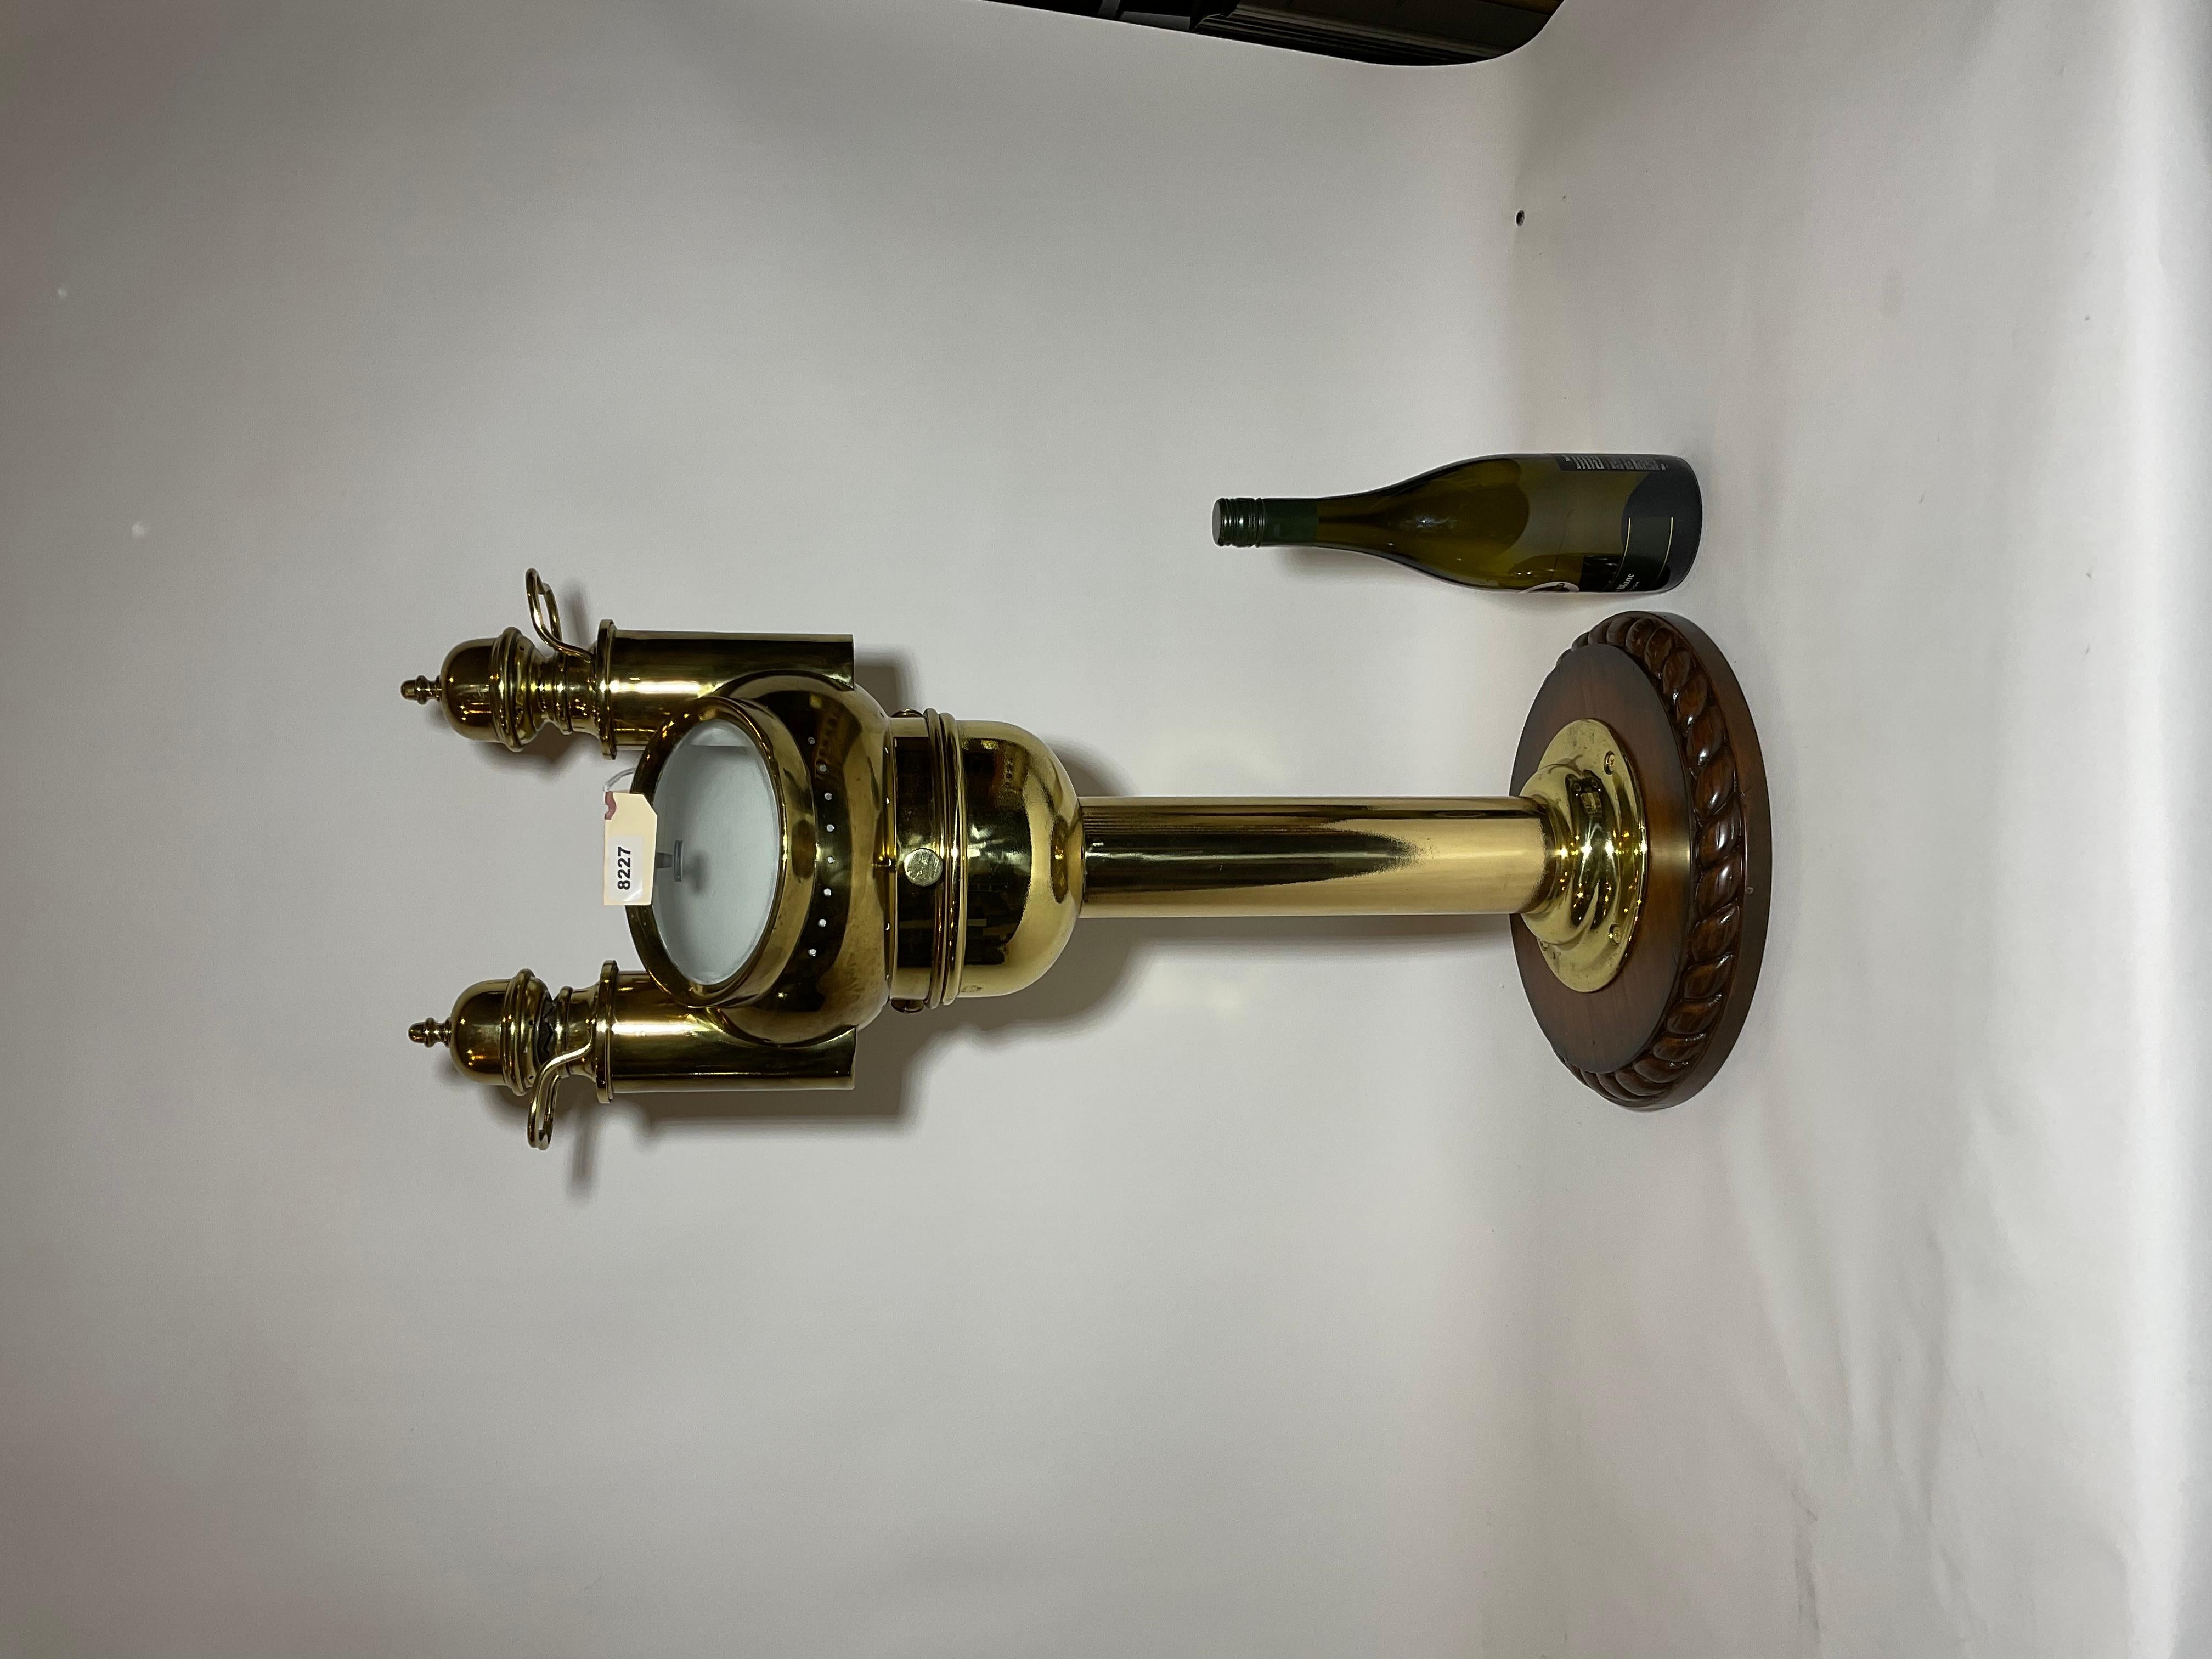 Rare yacht binnacle from Negus of New York. The mushroom top is fitted with two removable oil burners and has an oval glass viewing port. The binnacle pedestal holds a gimballed brass compass with engraved bezel from E.S Ritchie Boston and 1886,